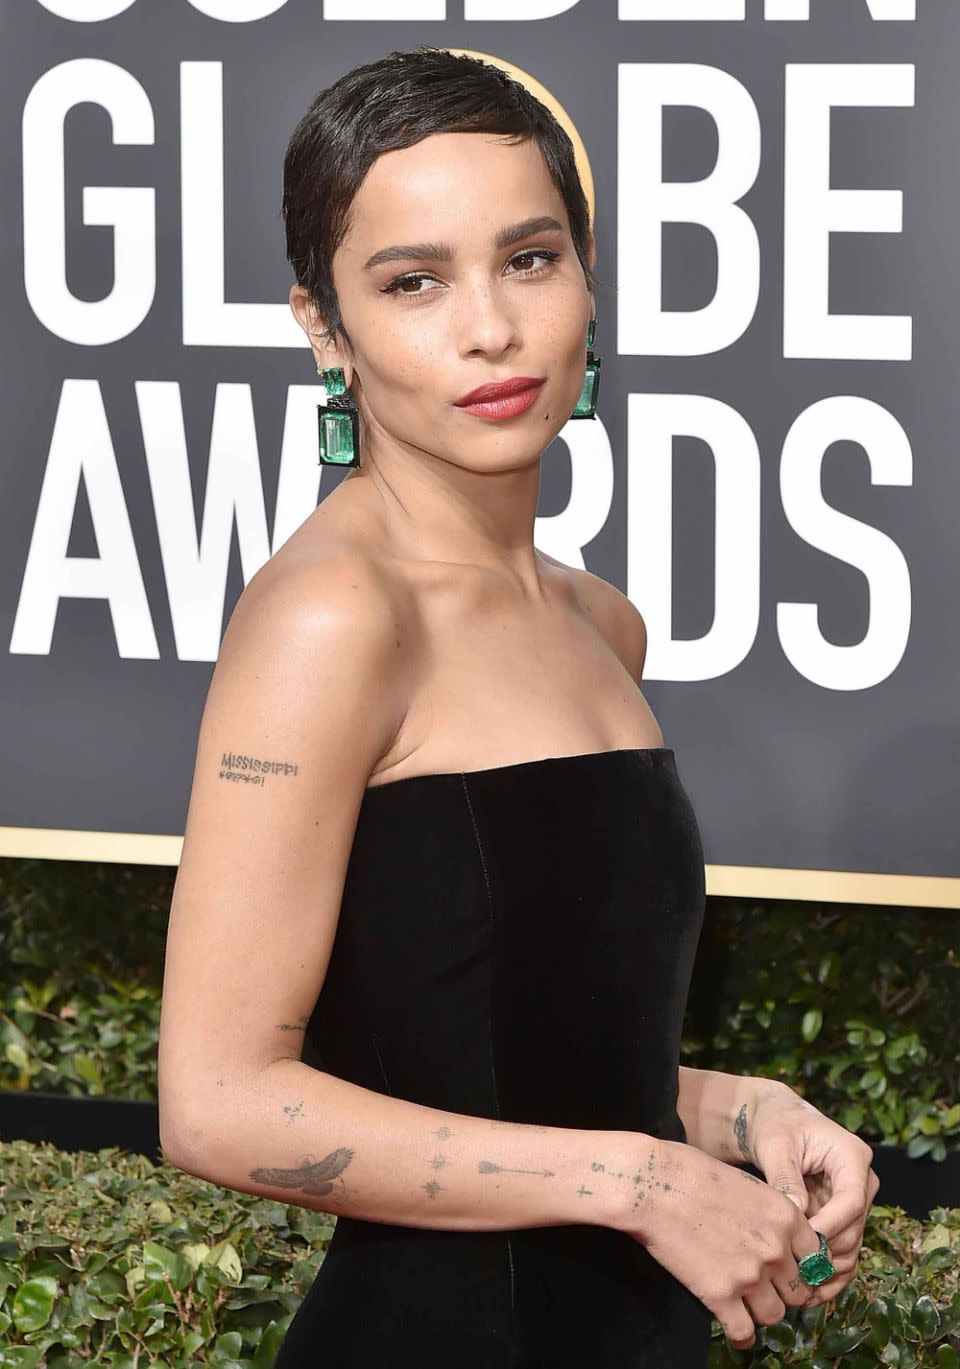 Zoe Kravitz also declared her support for Oprah to run for president at the Golden Globes. Source: Getty